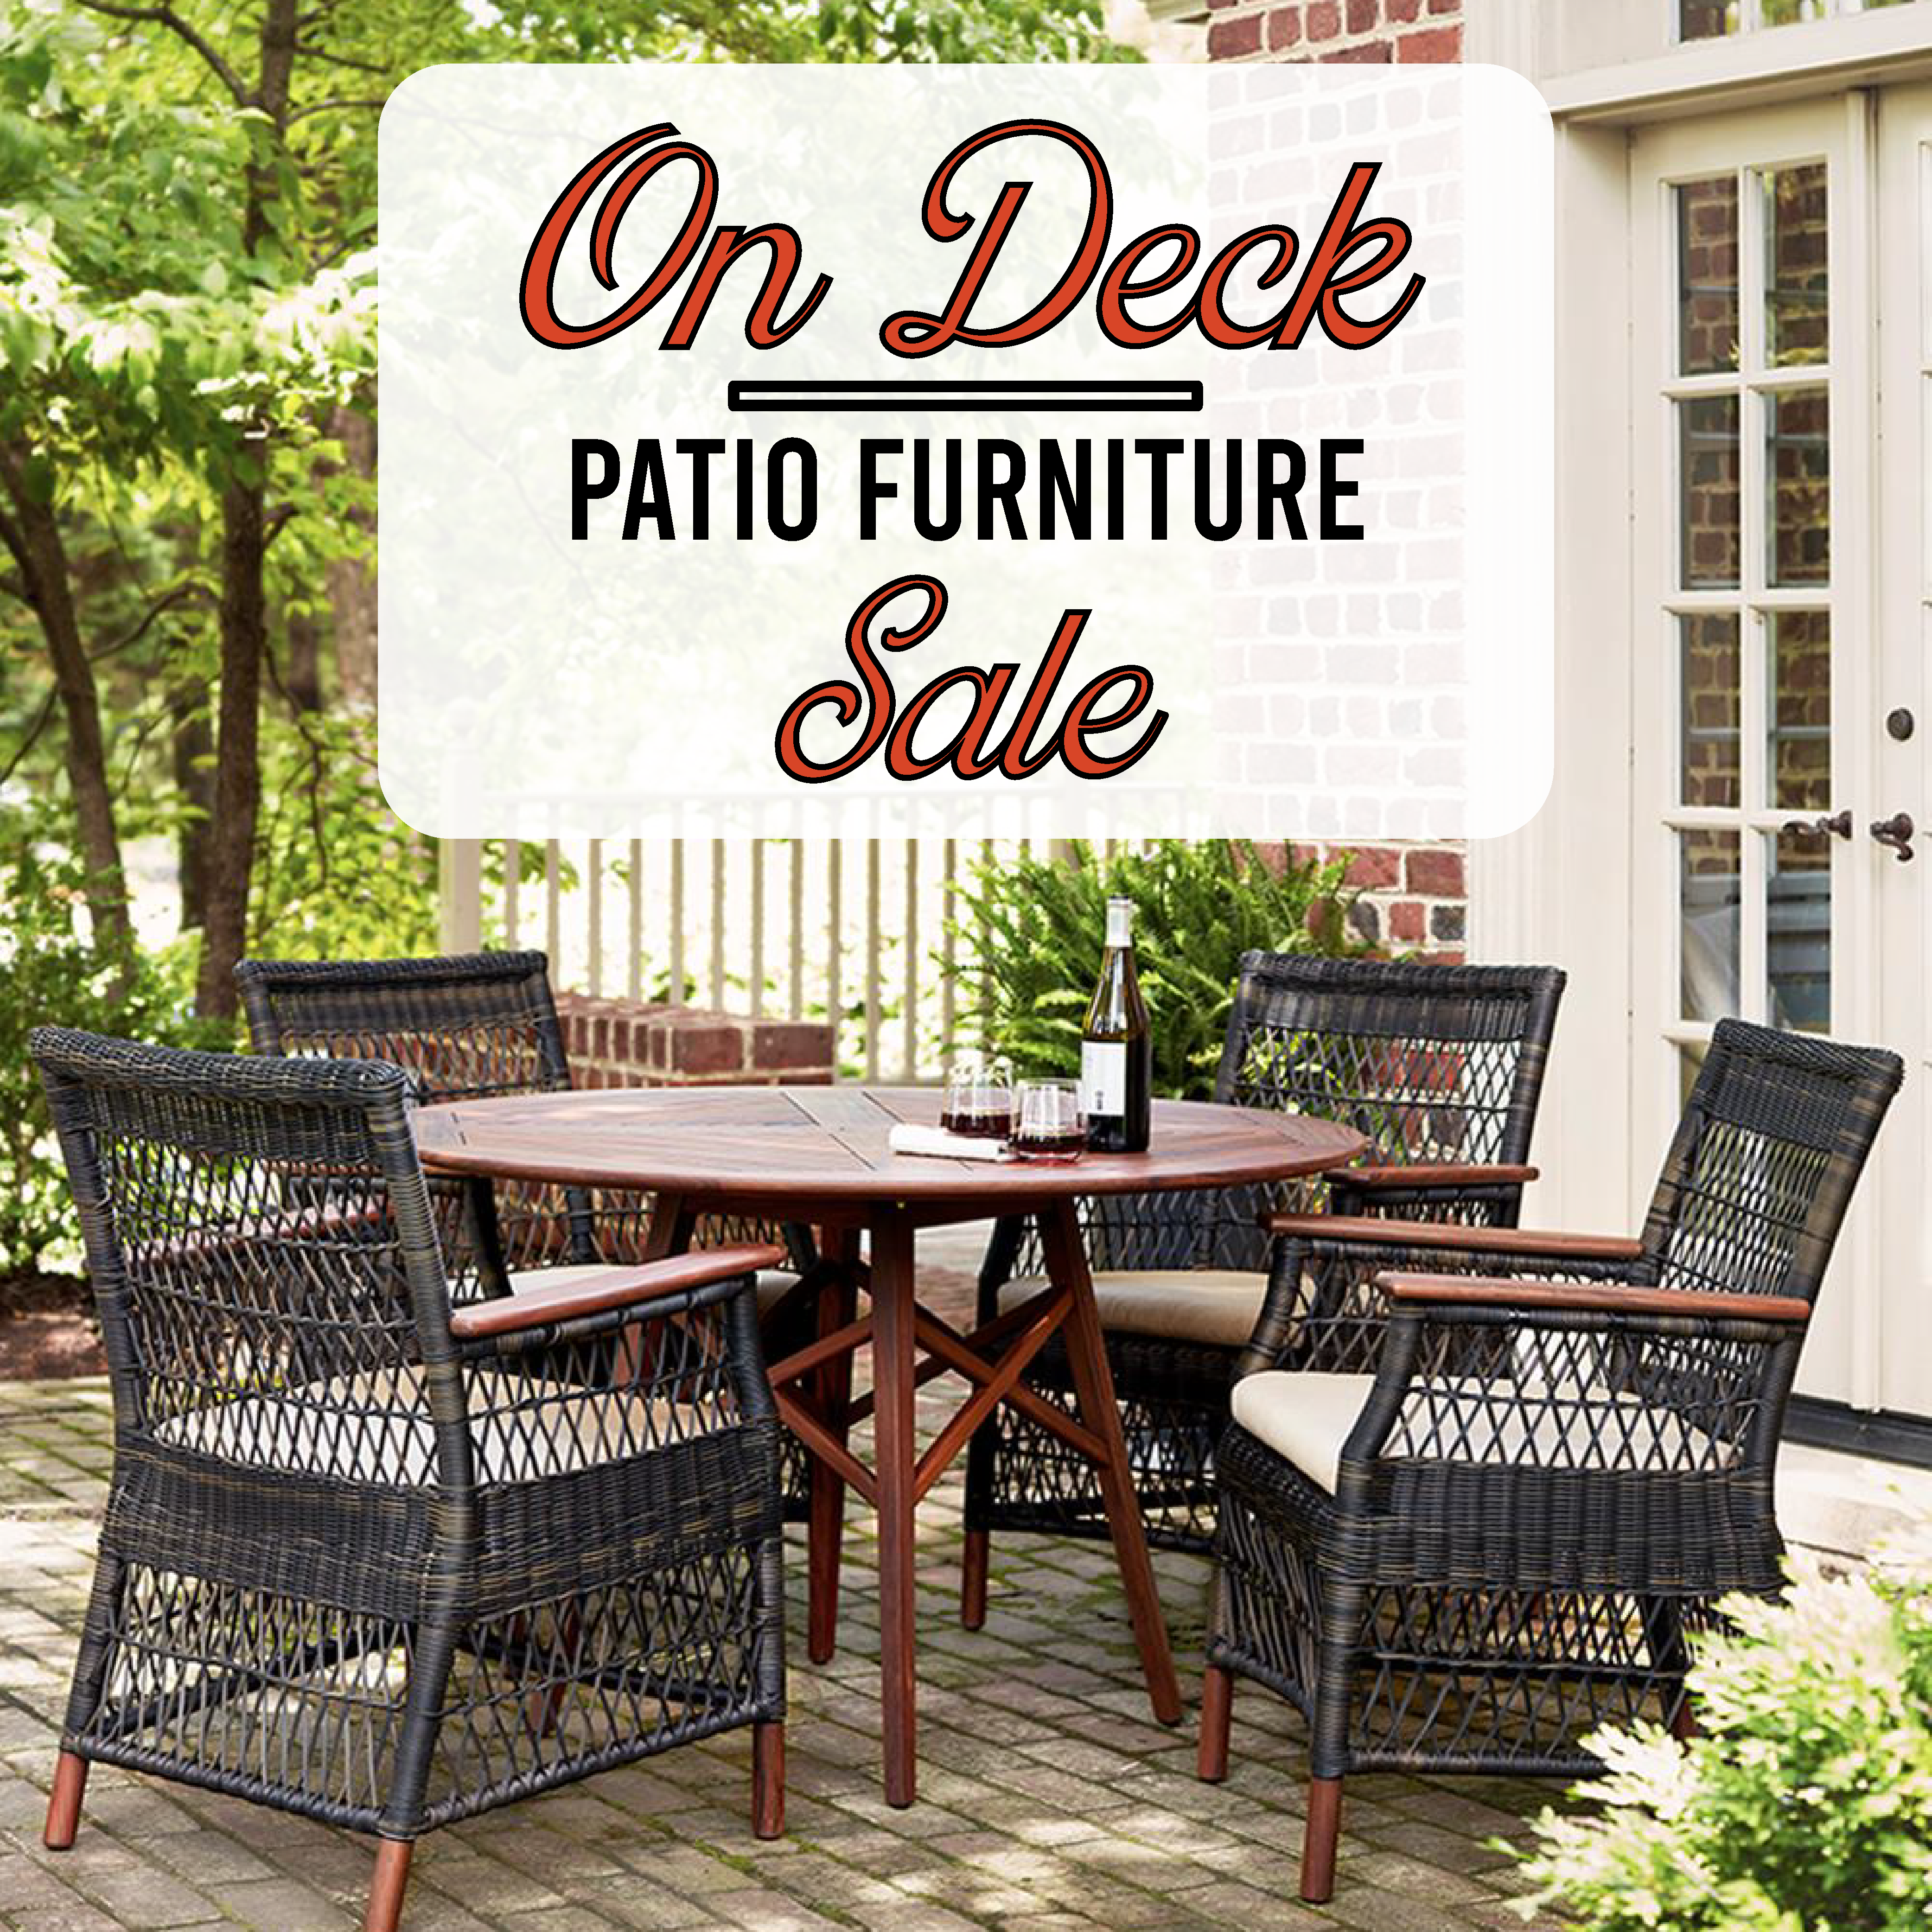 Featured image for “ON DECK PATIO FURNITURE SALE”